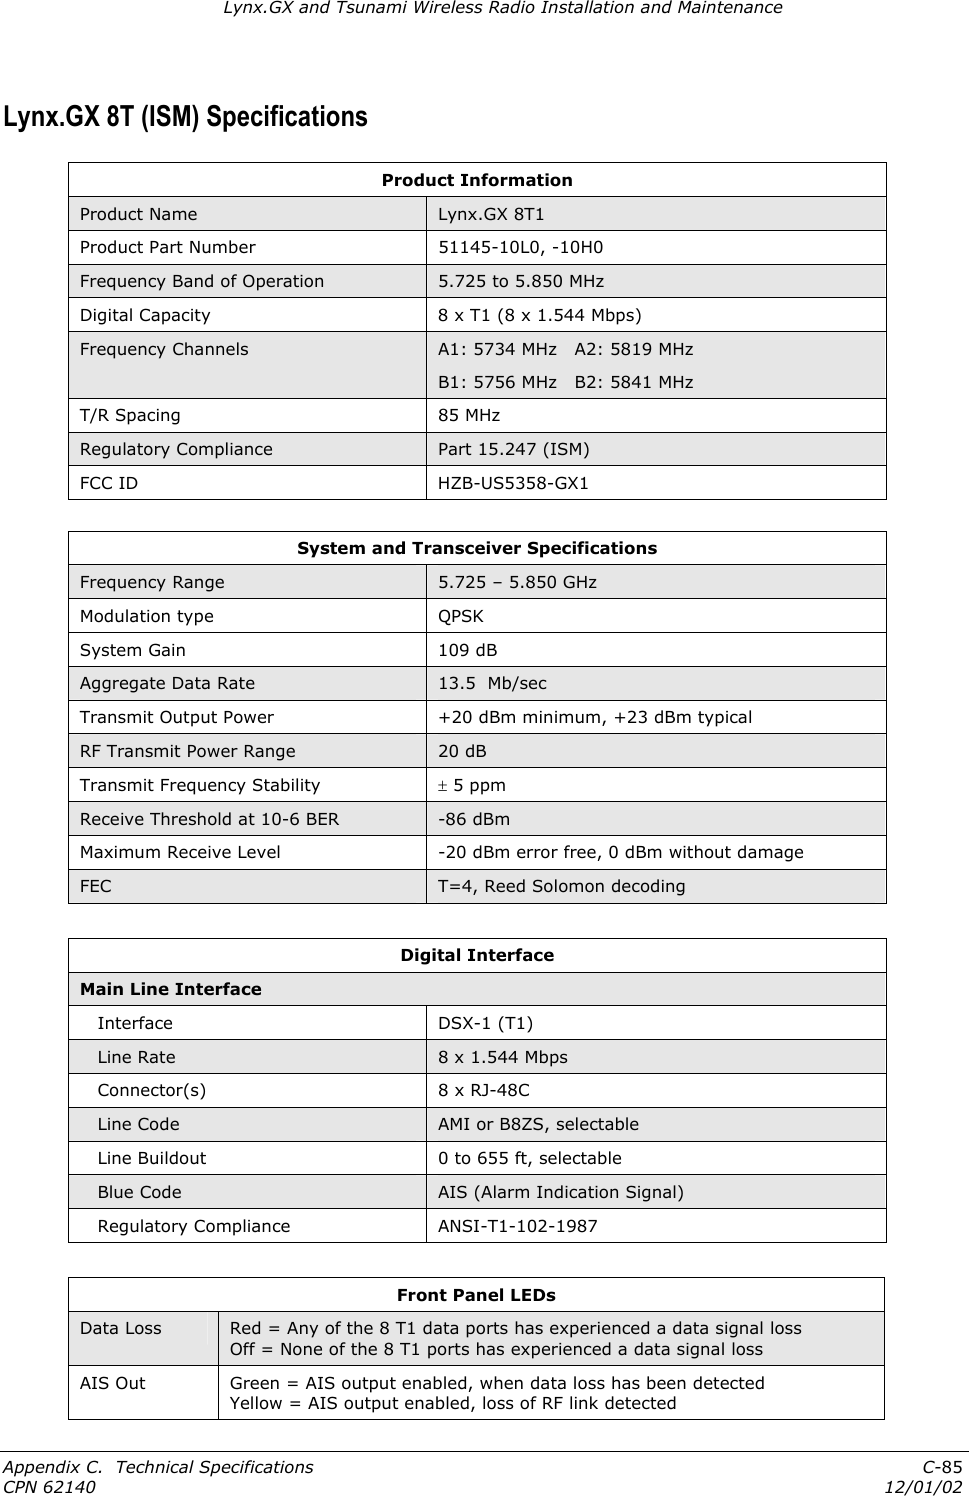 Lynx.GX and Tsunami Wireless Radio Installation and Maintenance Lynx.GX 8T (ISM) Specifications Product Information Product Name  Lynx.GX 8T1  Product Part Number  51145-10L0, -10H0 Frequency Band of Operation  5.725 to 5.850 MHz Digital Capacity  8 x T1 (8 x 1.544 Mbps) Frequency Channels  A1: 5734 MHz   A2: 5819 MHz B1: 5756 MHz   B2: 5841 MHz T/R Spacing  85 MHz Regulatory Compliance  Part 15.247 (ISM) FCC ID  HZB-US5358-GX1  System and Transceiver Specifications Frequency Range  5.725 – 5.850 GHz Modulation type  QPSK System Gain  109 dB Aggregate Data Rate  13.5  Mb/sec Transmit Output Power  +20 dBm minimum, +23 dBm typical RF Transmit Power Range  20 dB Transmit Frequency Stability  ± 5 ppm  Receive Threshold at 10-6 BER  -86 dBm Maximum Receive Level  -20 dBm error free, 0 dBm without damage FEC  T=4, Reed Solomon decoding  Digital Interface Main Line Interface    Interface  DSX-1 (T1)    Line Rate  8 x 1.544 Mbps     Connector(s)  8 x RJ-48C    Line Code  AMI or B8ZS, selectable    Line Buildout  0 to 655 ft, selectable    Blue Code  AIS (Alarm Indication Signal)    Regulatory Compliance  ANSI-T1-102-1987  Front Panel LEDs Data Loss  Red = Any of the 8 T1 data ports has experienced a data signal loss Off = None of the 8 T1 ports has experienced a data signal loss AIS Out  Green = AIS output enabled, when data loss has been detected Yellow = AIS output enabled, loss of RF link detected Appendix C.  Technical Specifications  C-85 CPN 62140  12/01/02 